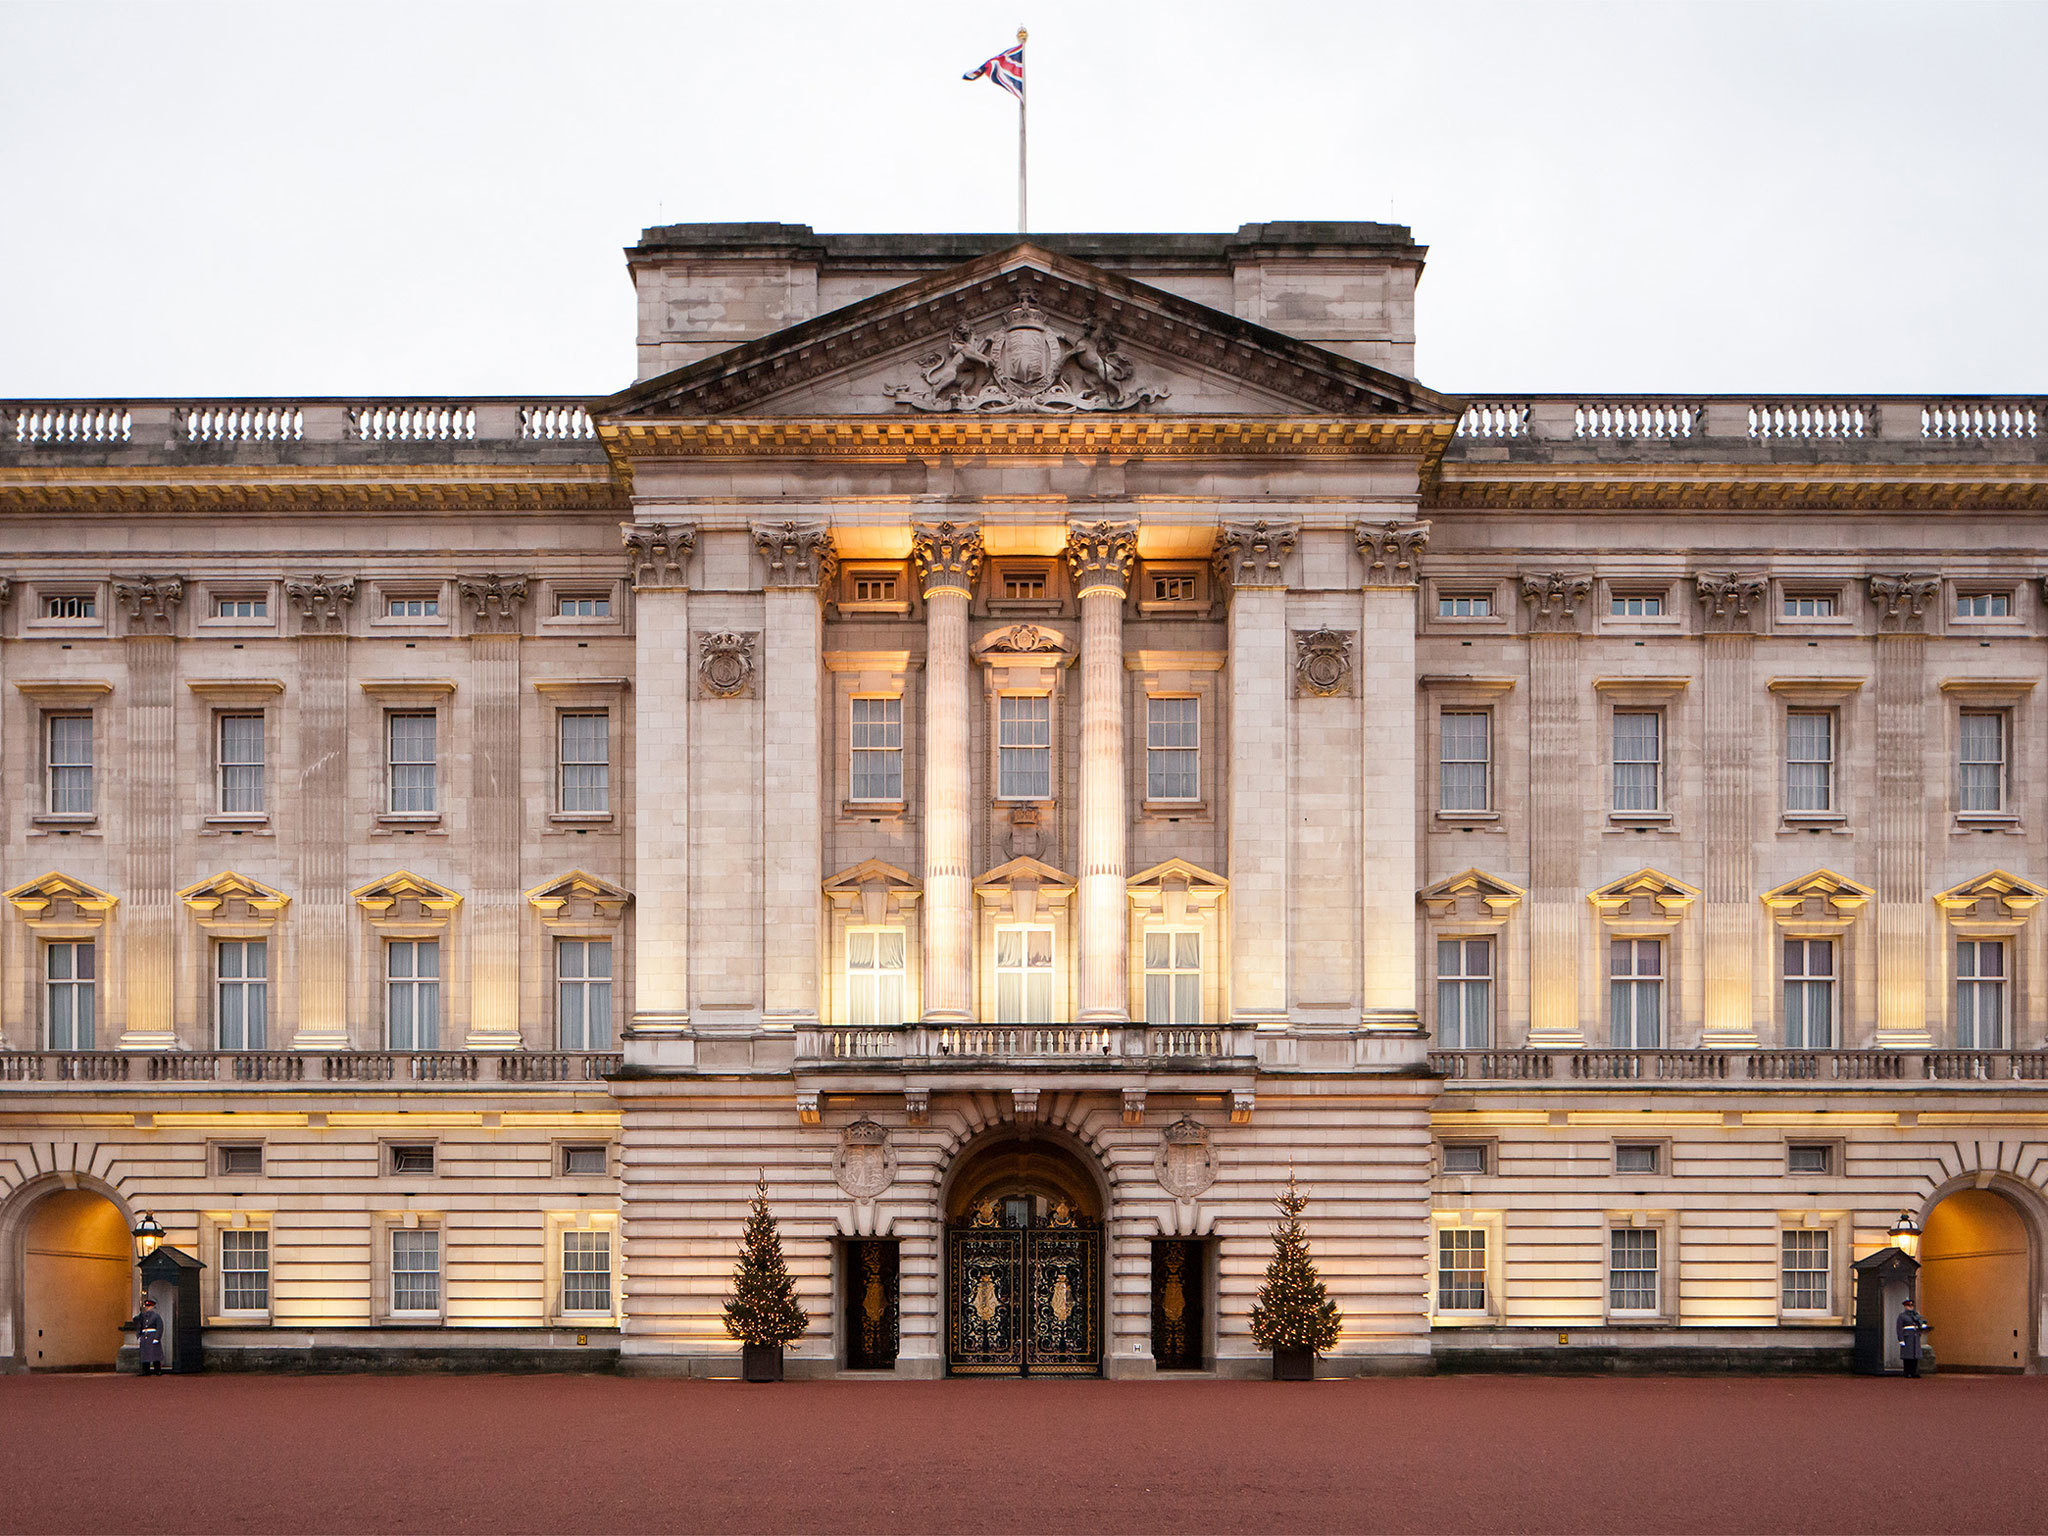 Buckingham Palace ultimate guide to London's royal residence Time